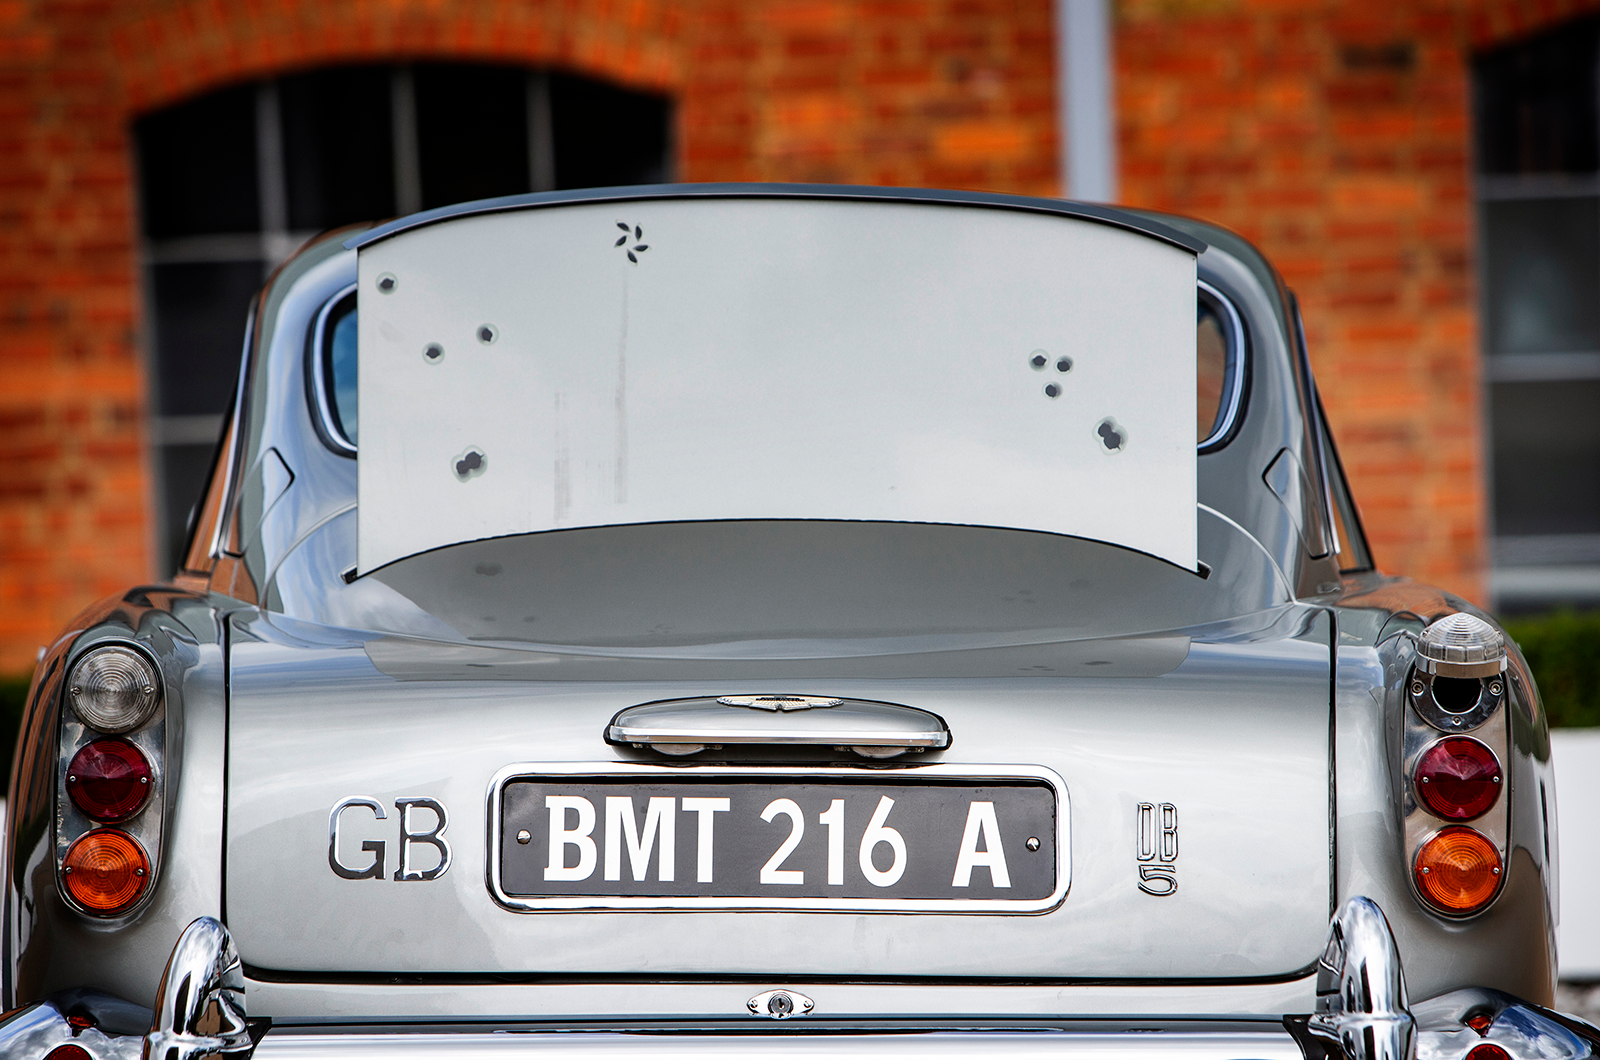 Classic & Sports Car – Bond’s actual Aston Martin DB5 is coming to auction